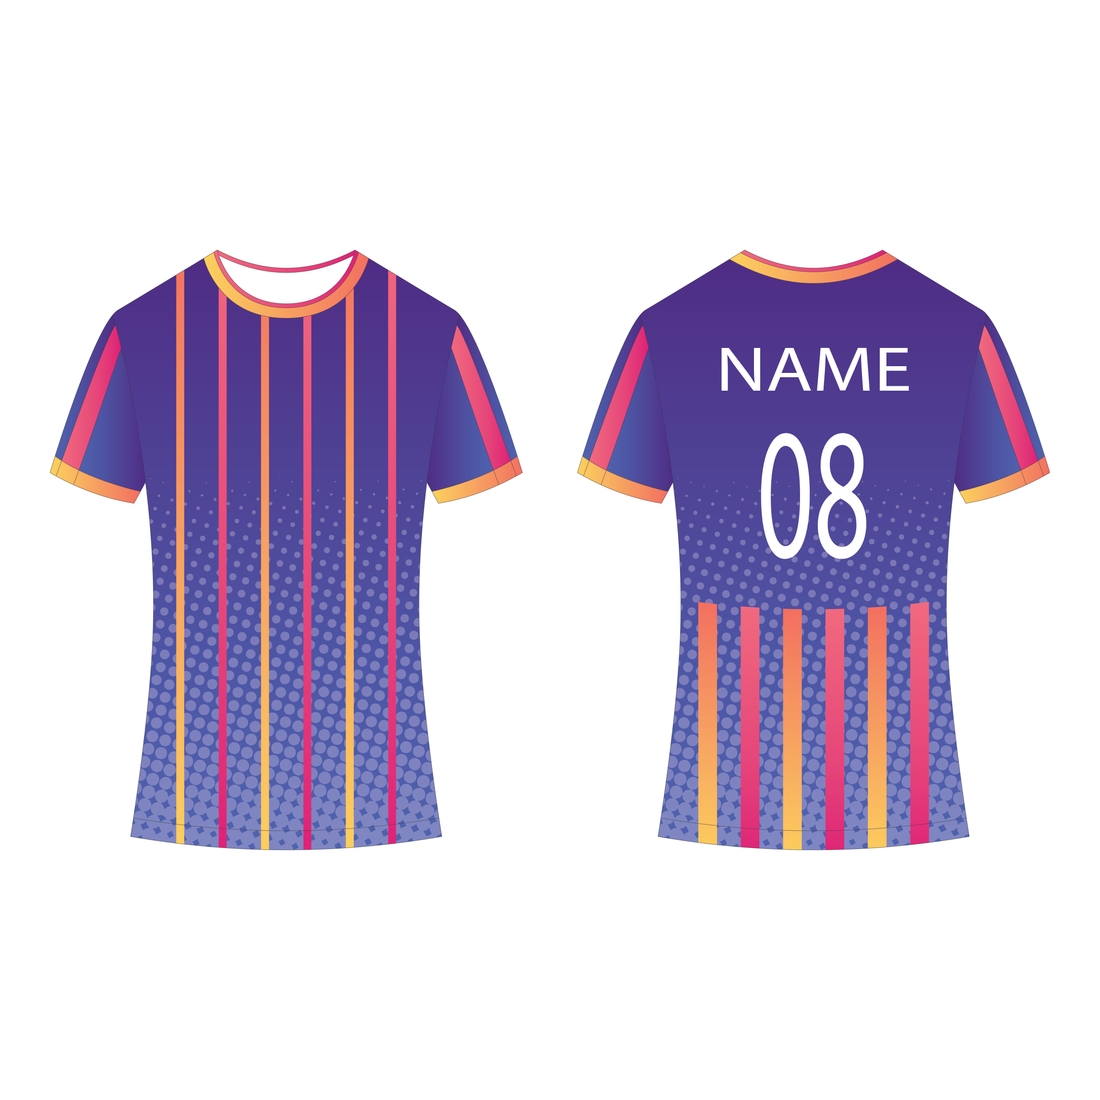 NEXT PRINT All Over Printed Customized Sublimation T-Shirt Unisex Sports Jersey Player Name & Number, Team Name NP50000266